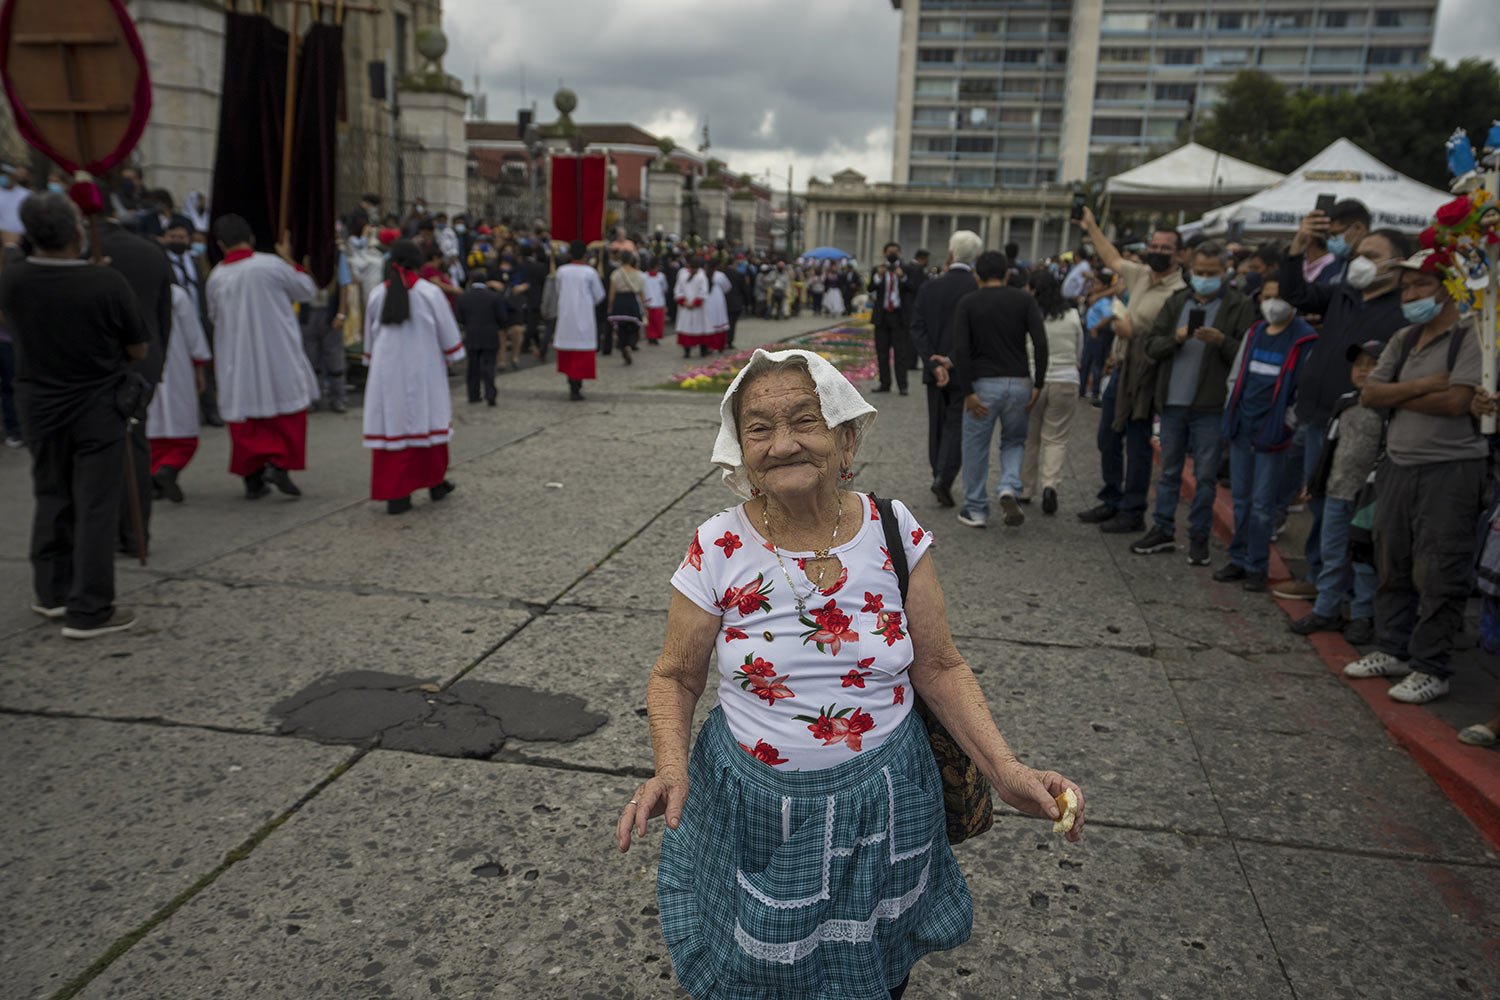  Catholics watch a procession honoring Guatemala City's patroness, the Virgin of the Assumption, in Guatemala City, Monday, Aug. 15, 2022. (AP Photo/Moises Castillo) 